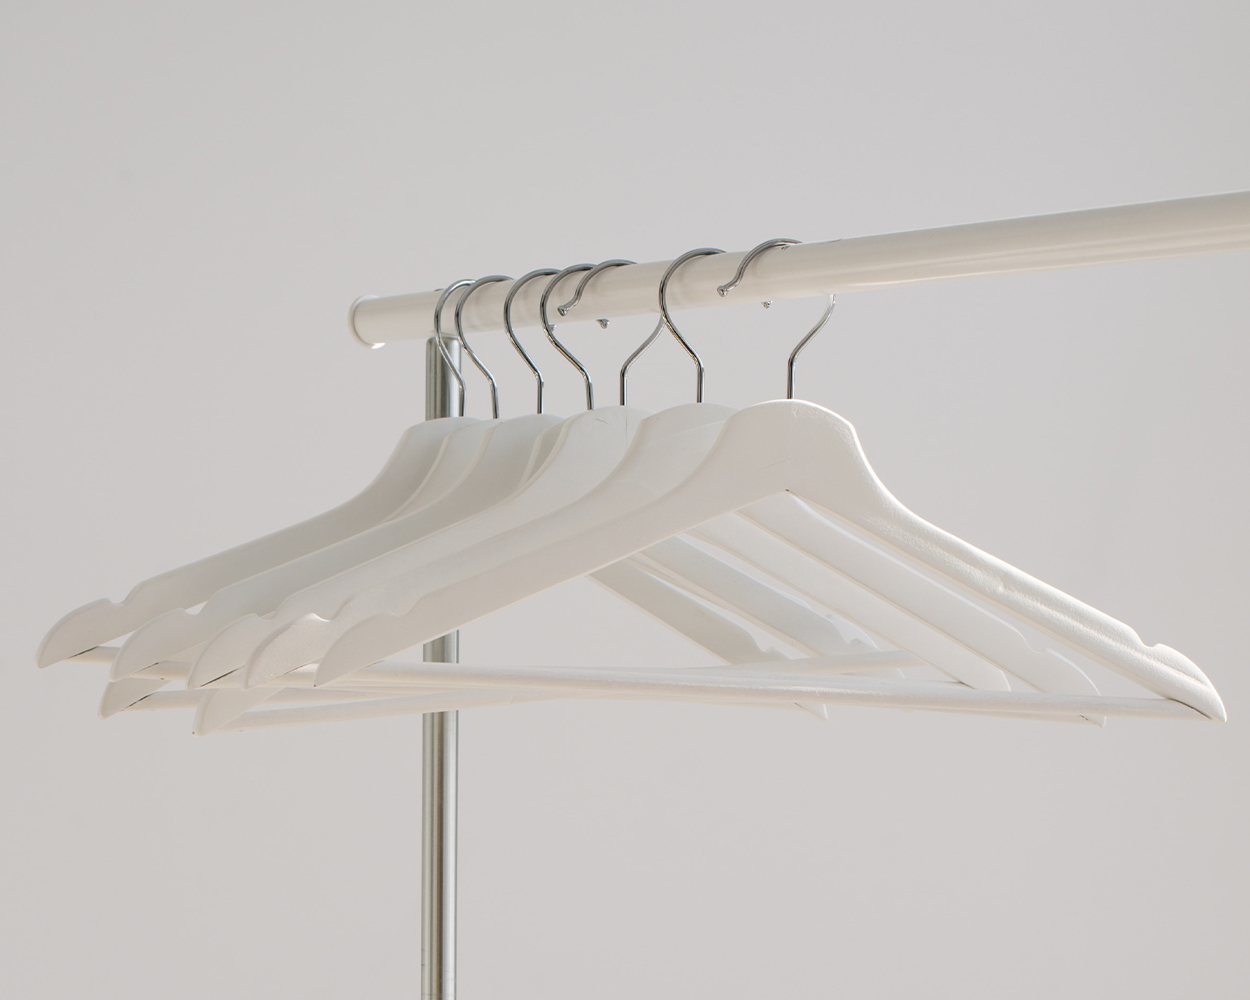  Empty white hangers hanging on a clothing rack.